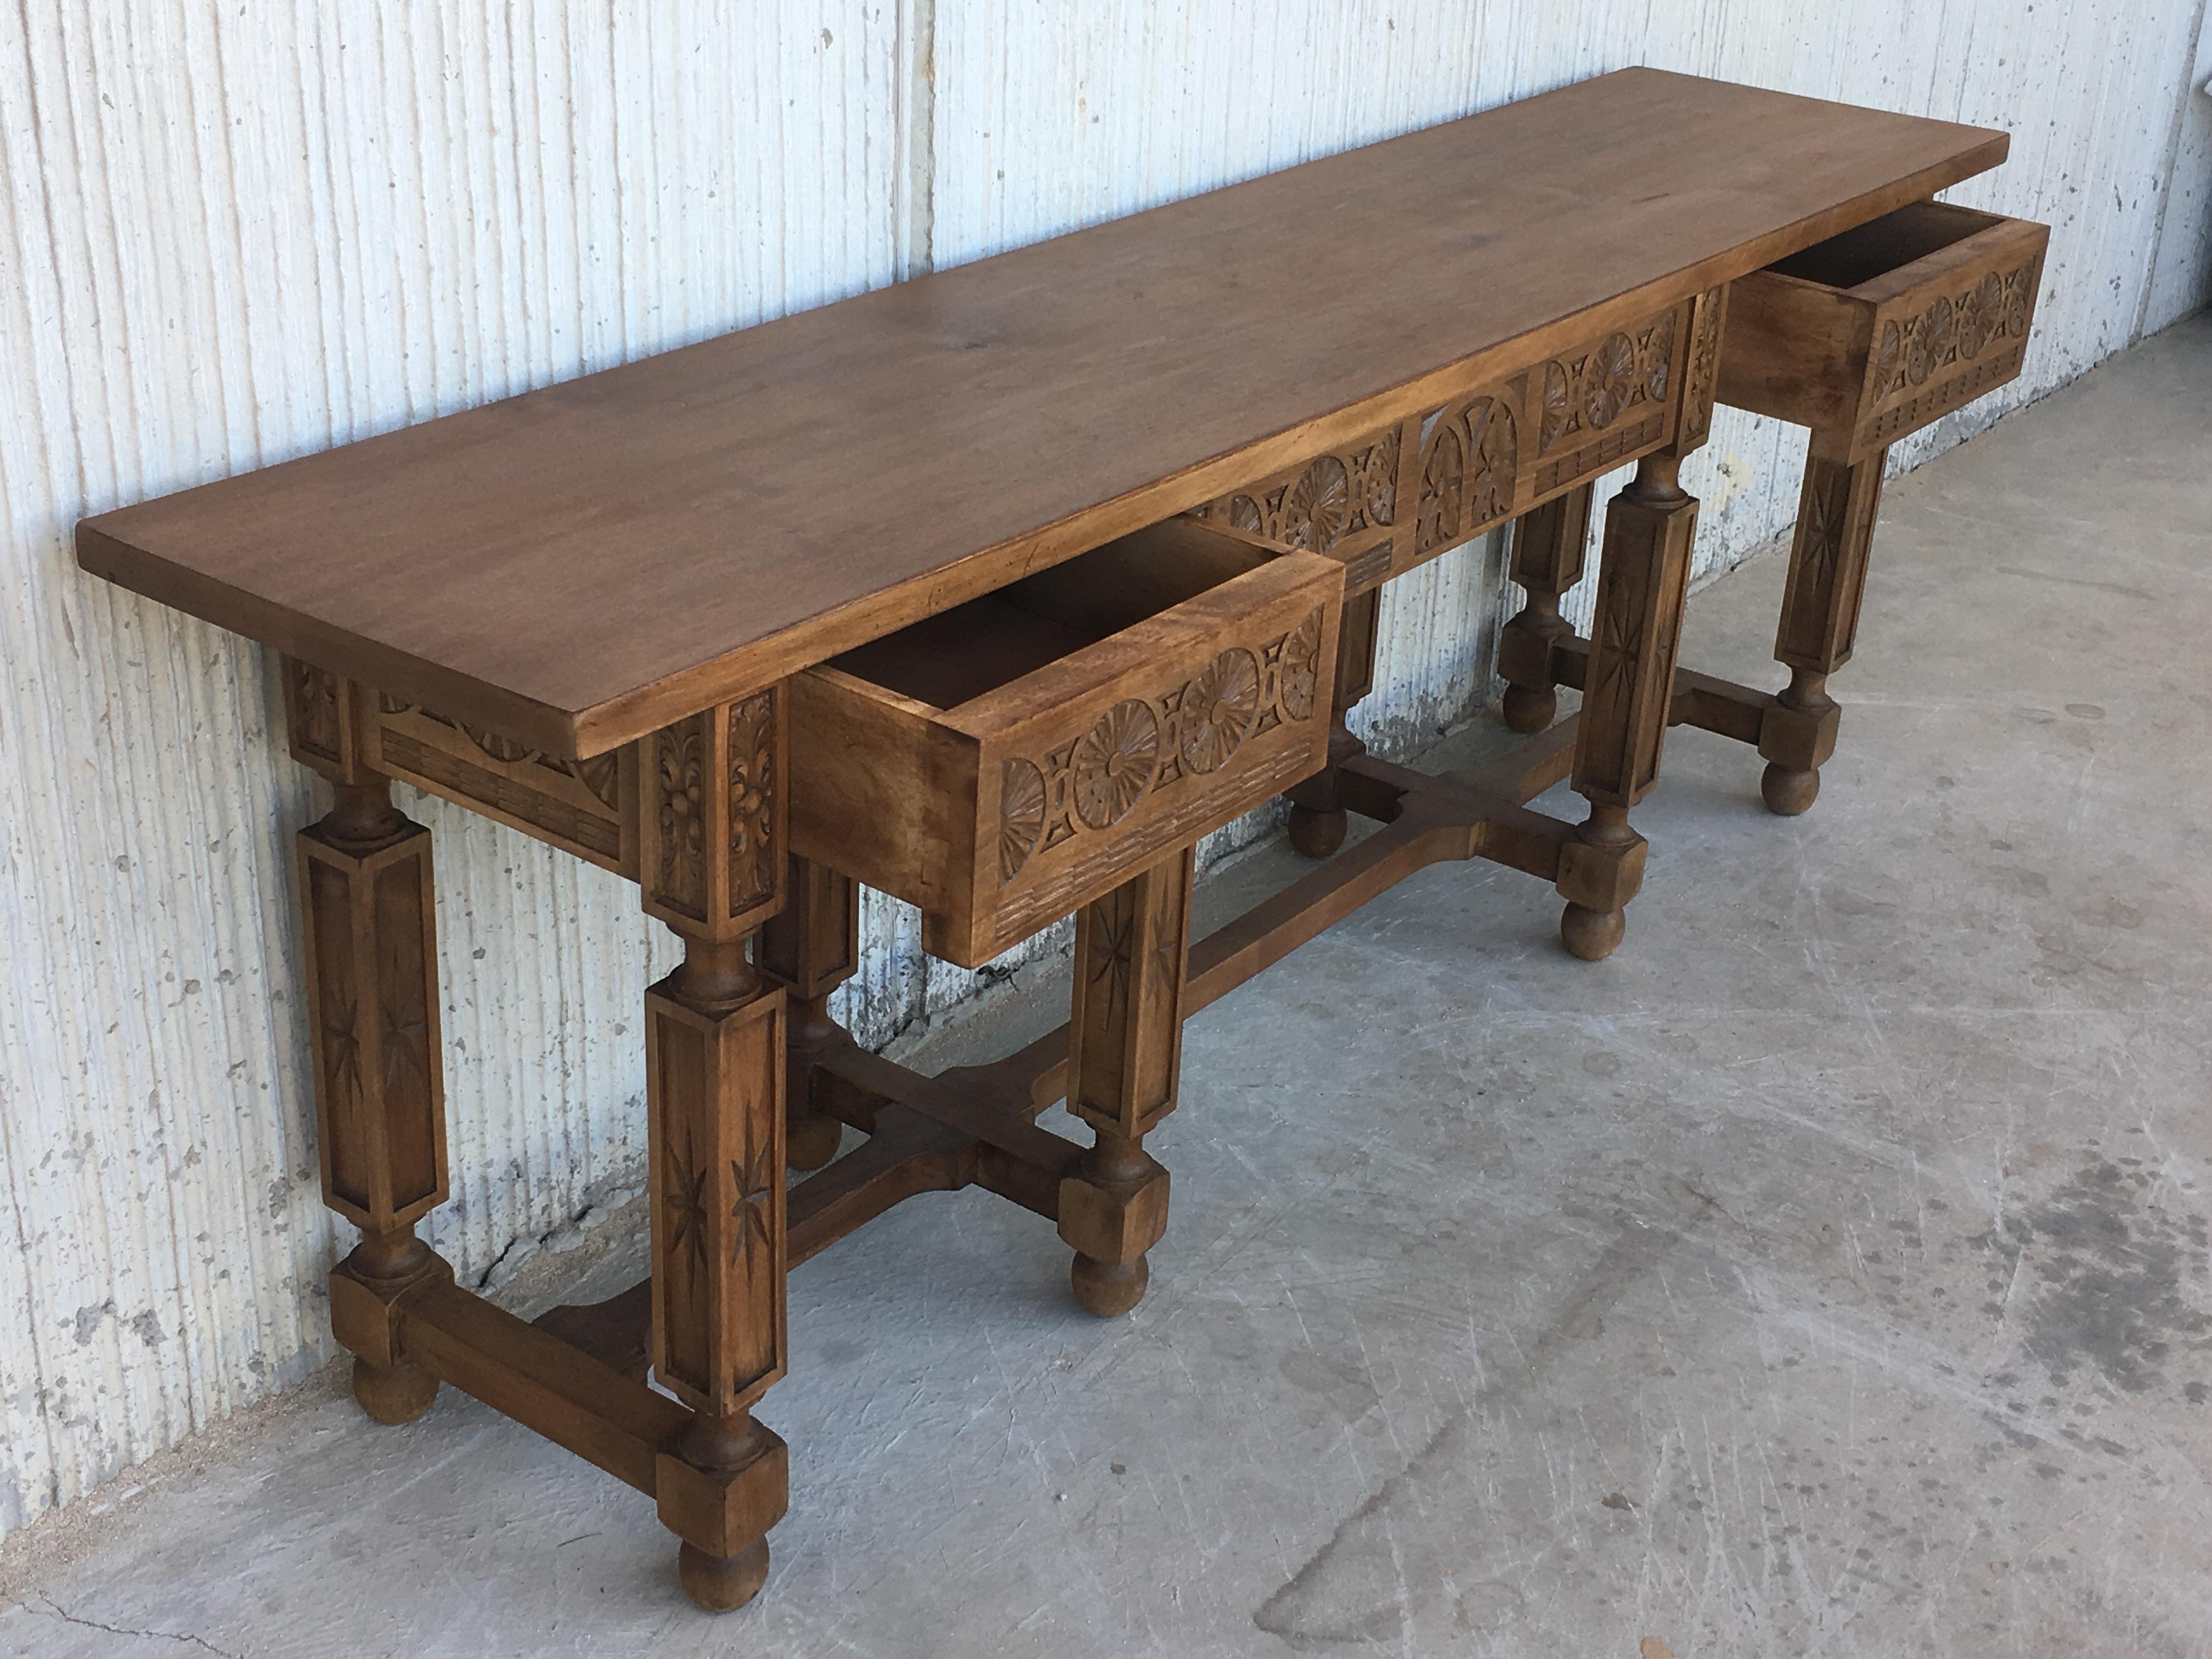 19th Century Spanish Carved Walnut Bench or Low Table with Two Drawers im Zustand „Gut“ in Miami, FL